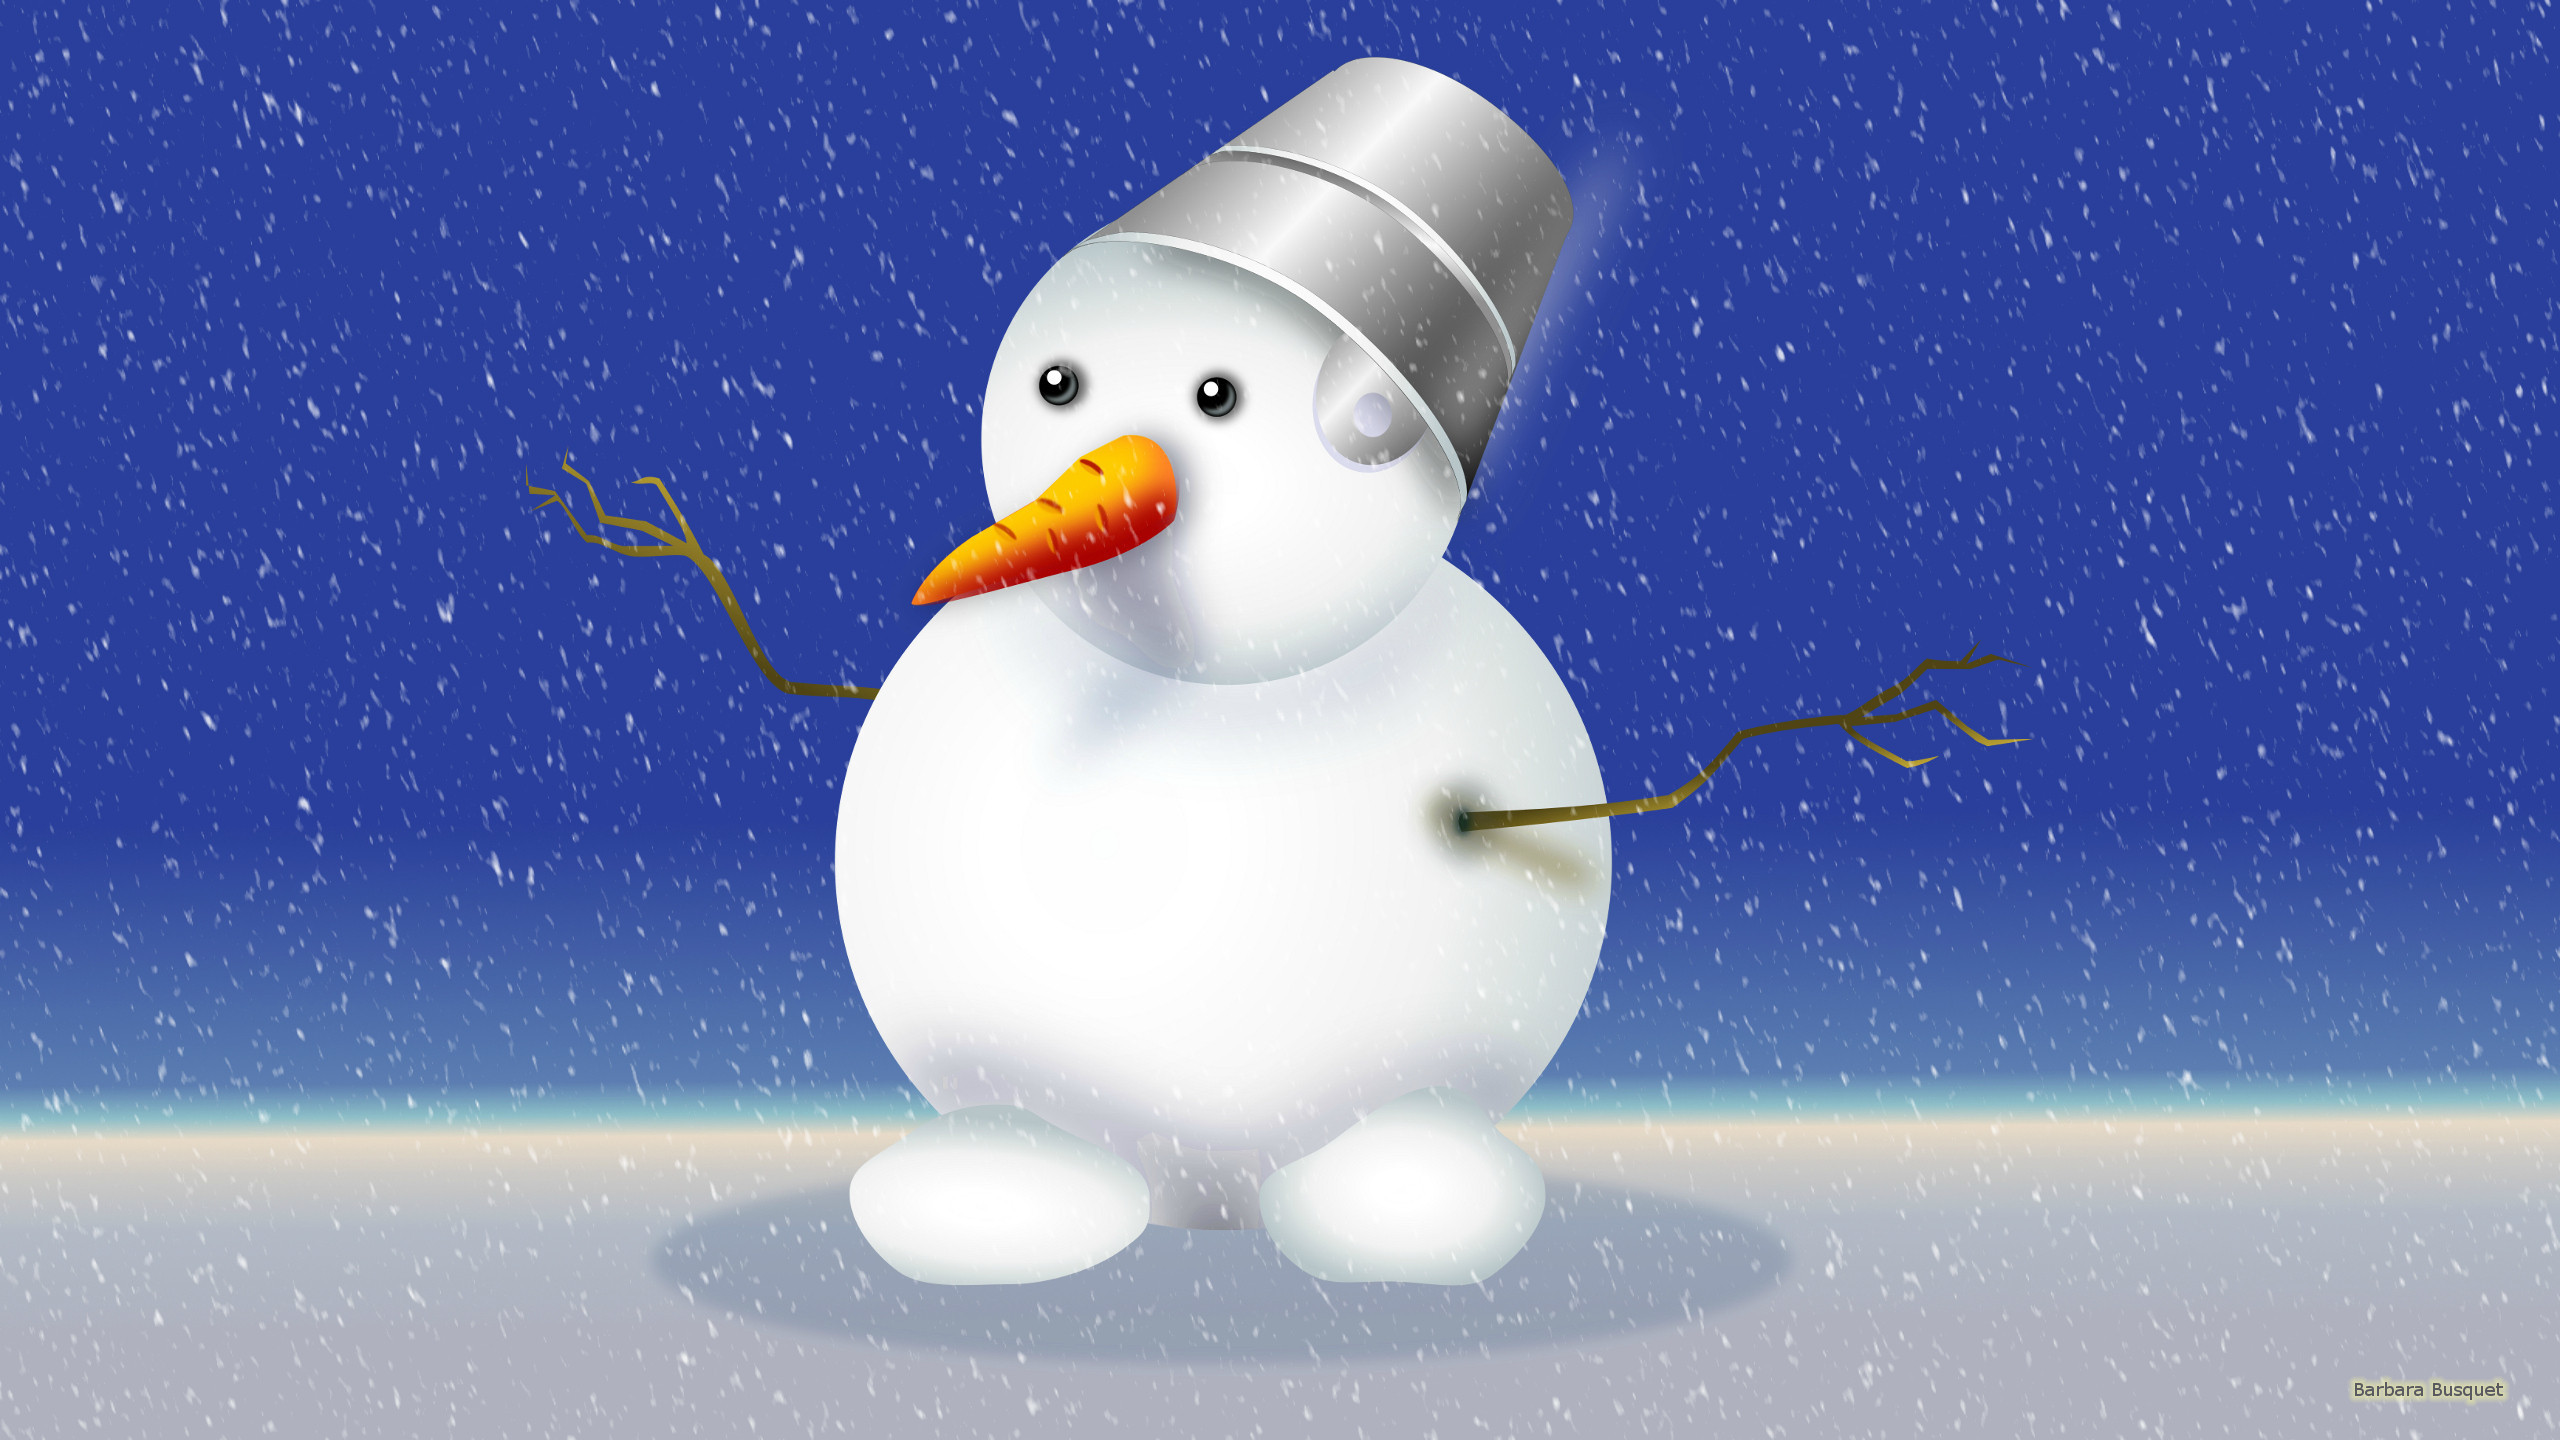 2560x1440 Winter wallpaper with a happy snowman while it's snowing. He has a carrot  nose and branches as arms. And a bucket on his head.